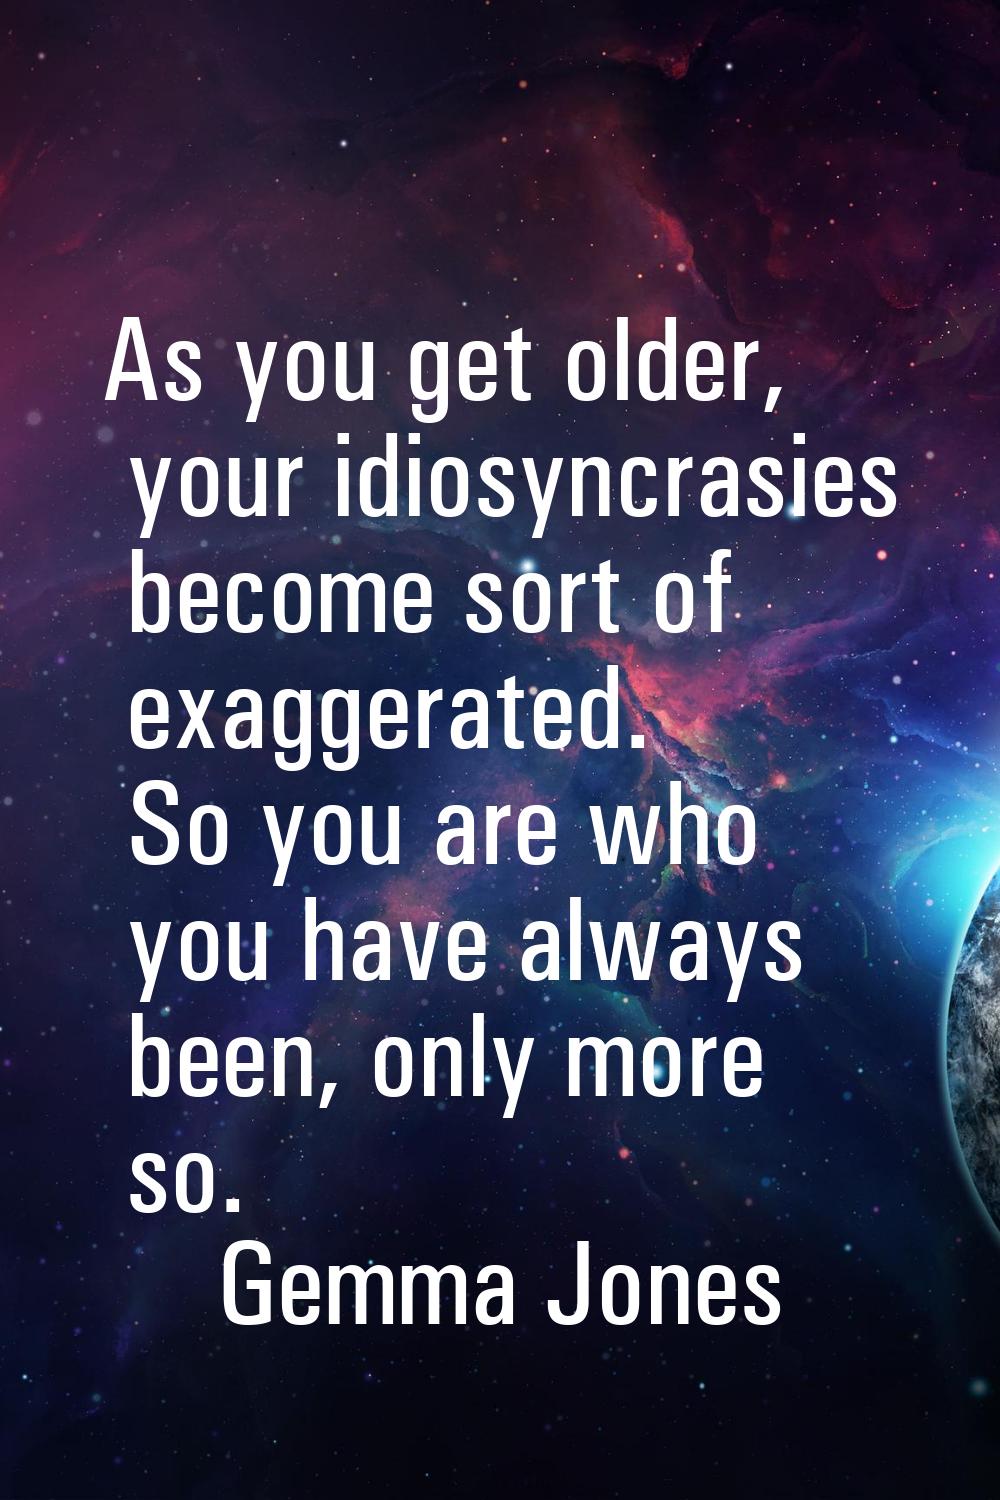 As you get older, your idiosyncrasies become sort of exaggerated. So you are who you have always be